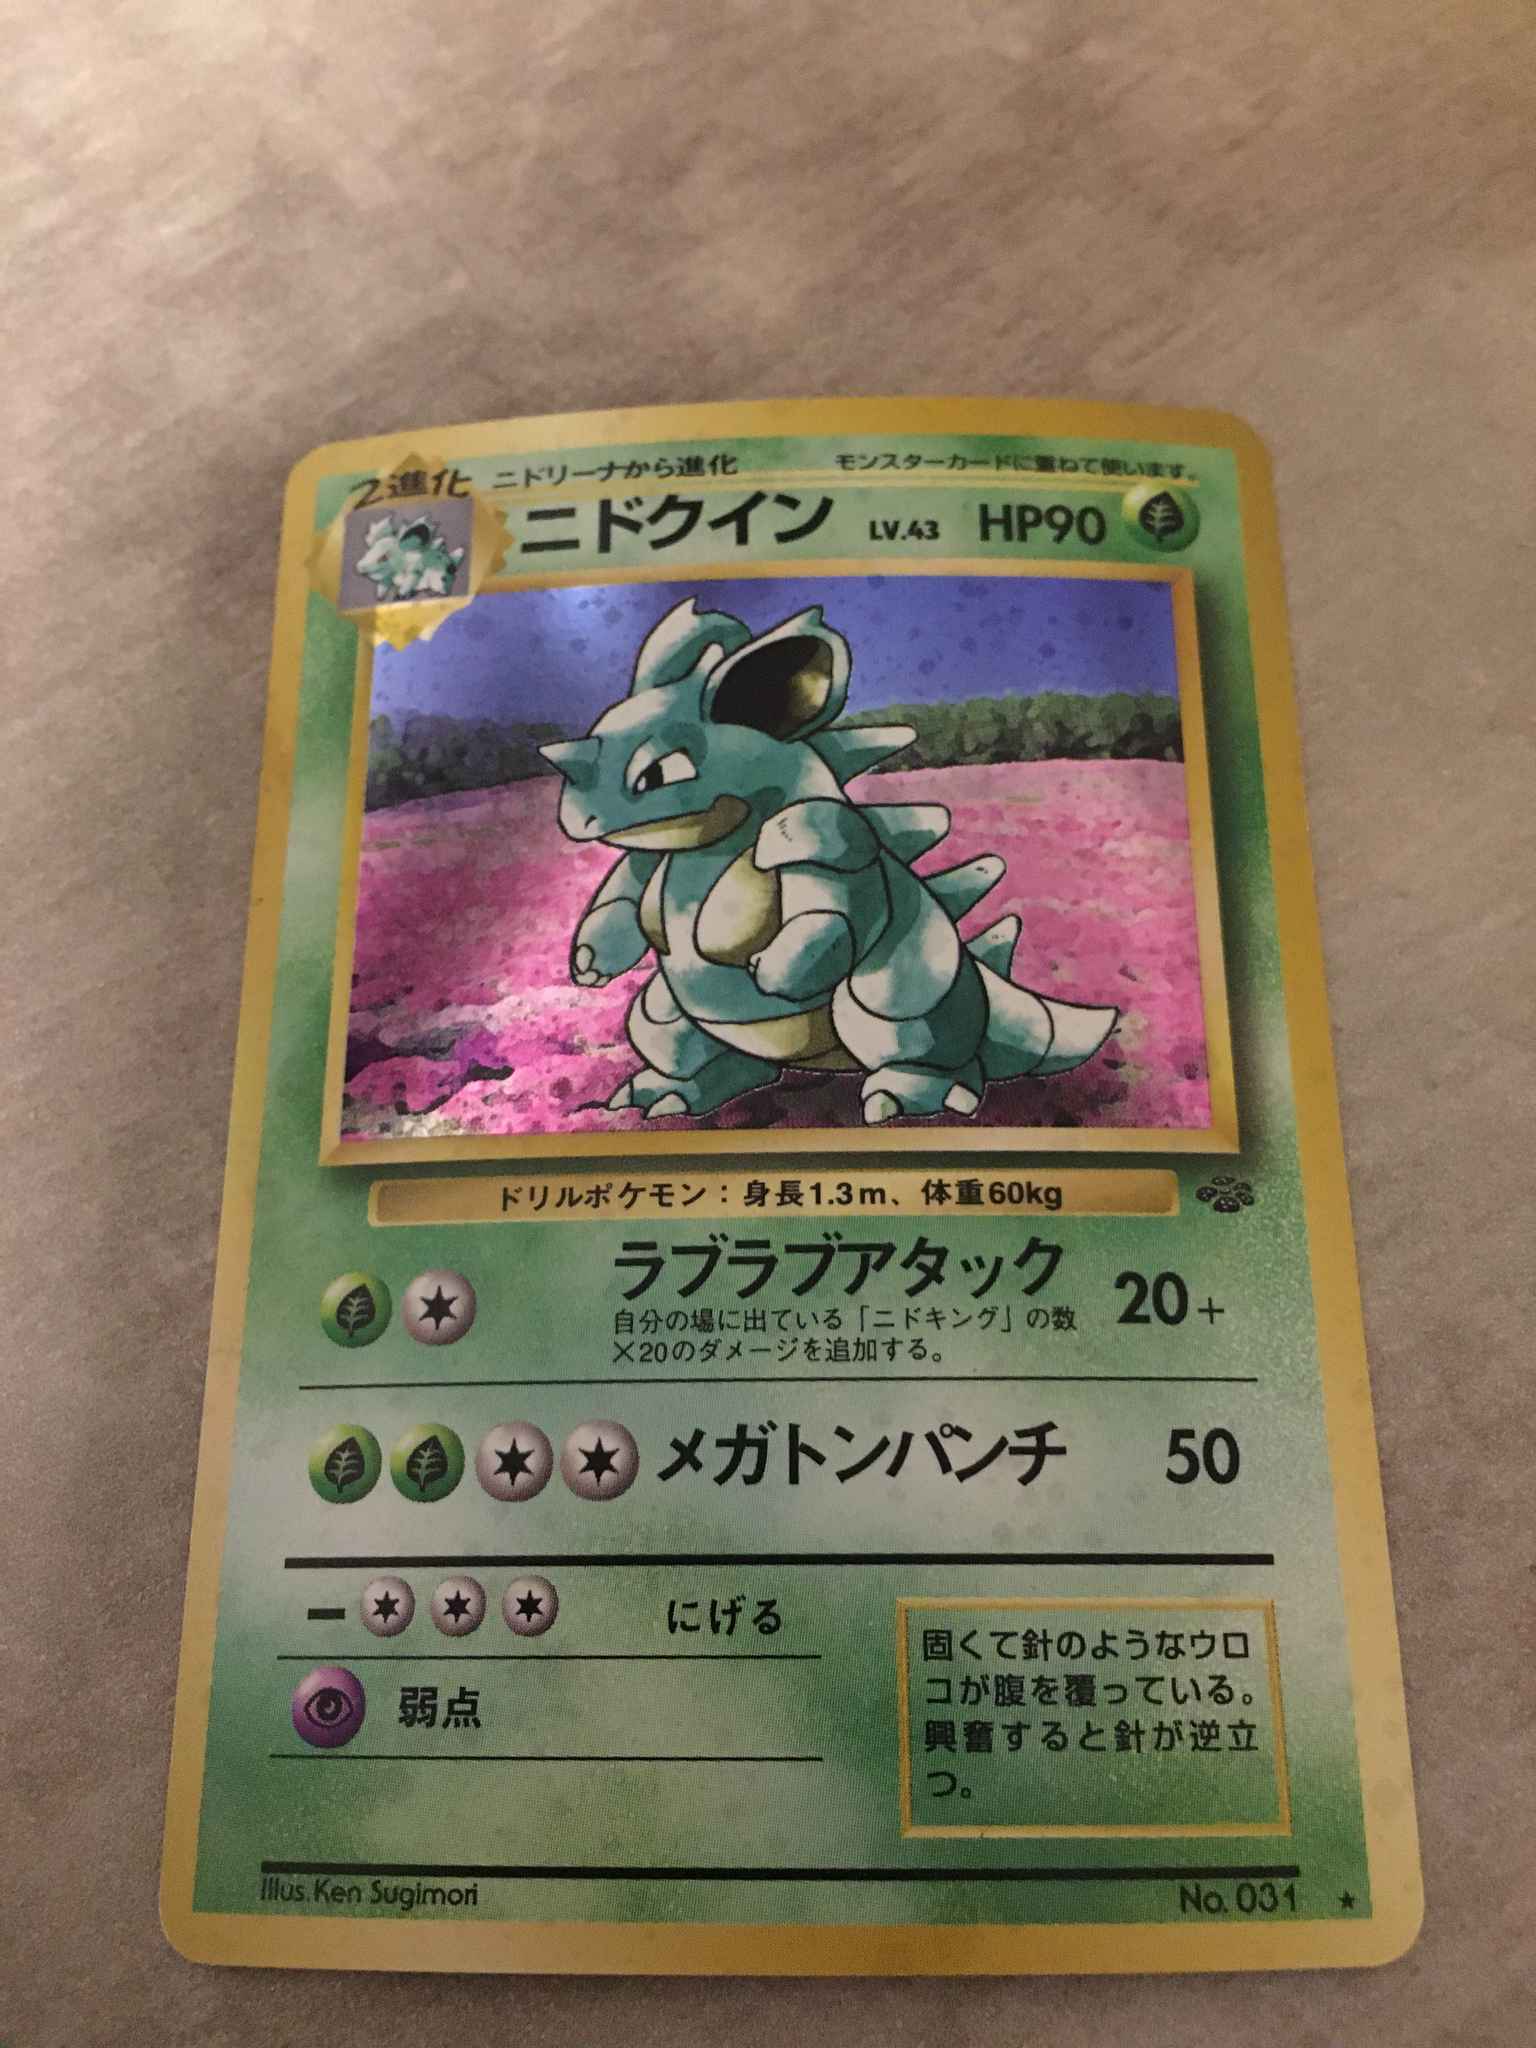 Japanese Holo Nidoqueen 7 Nidoqueen 7 Jungle Pokemon Online Gaming Store For Cards Miniatures Singles Packs Booster Boxes